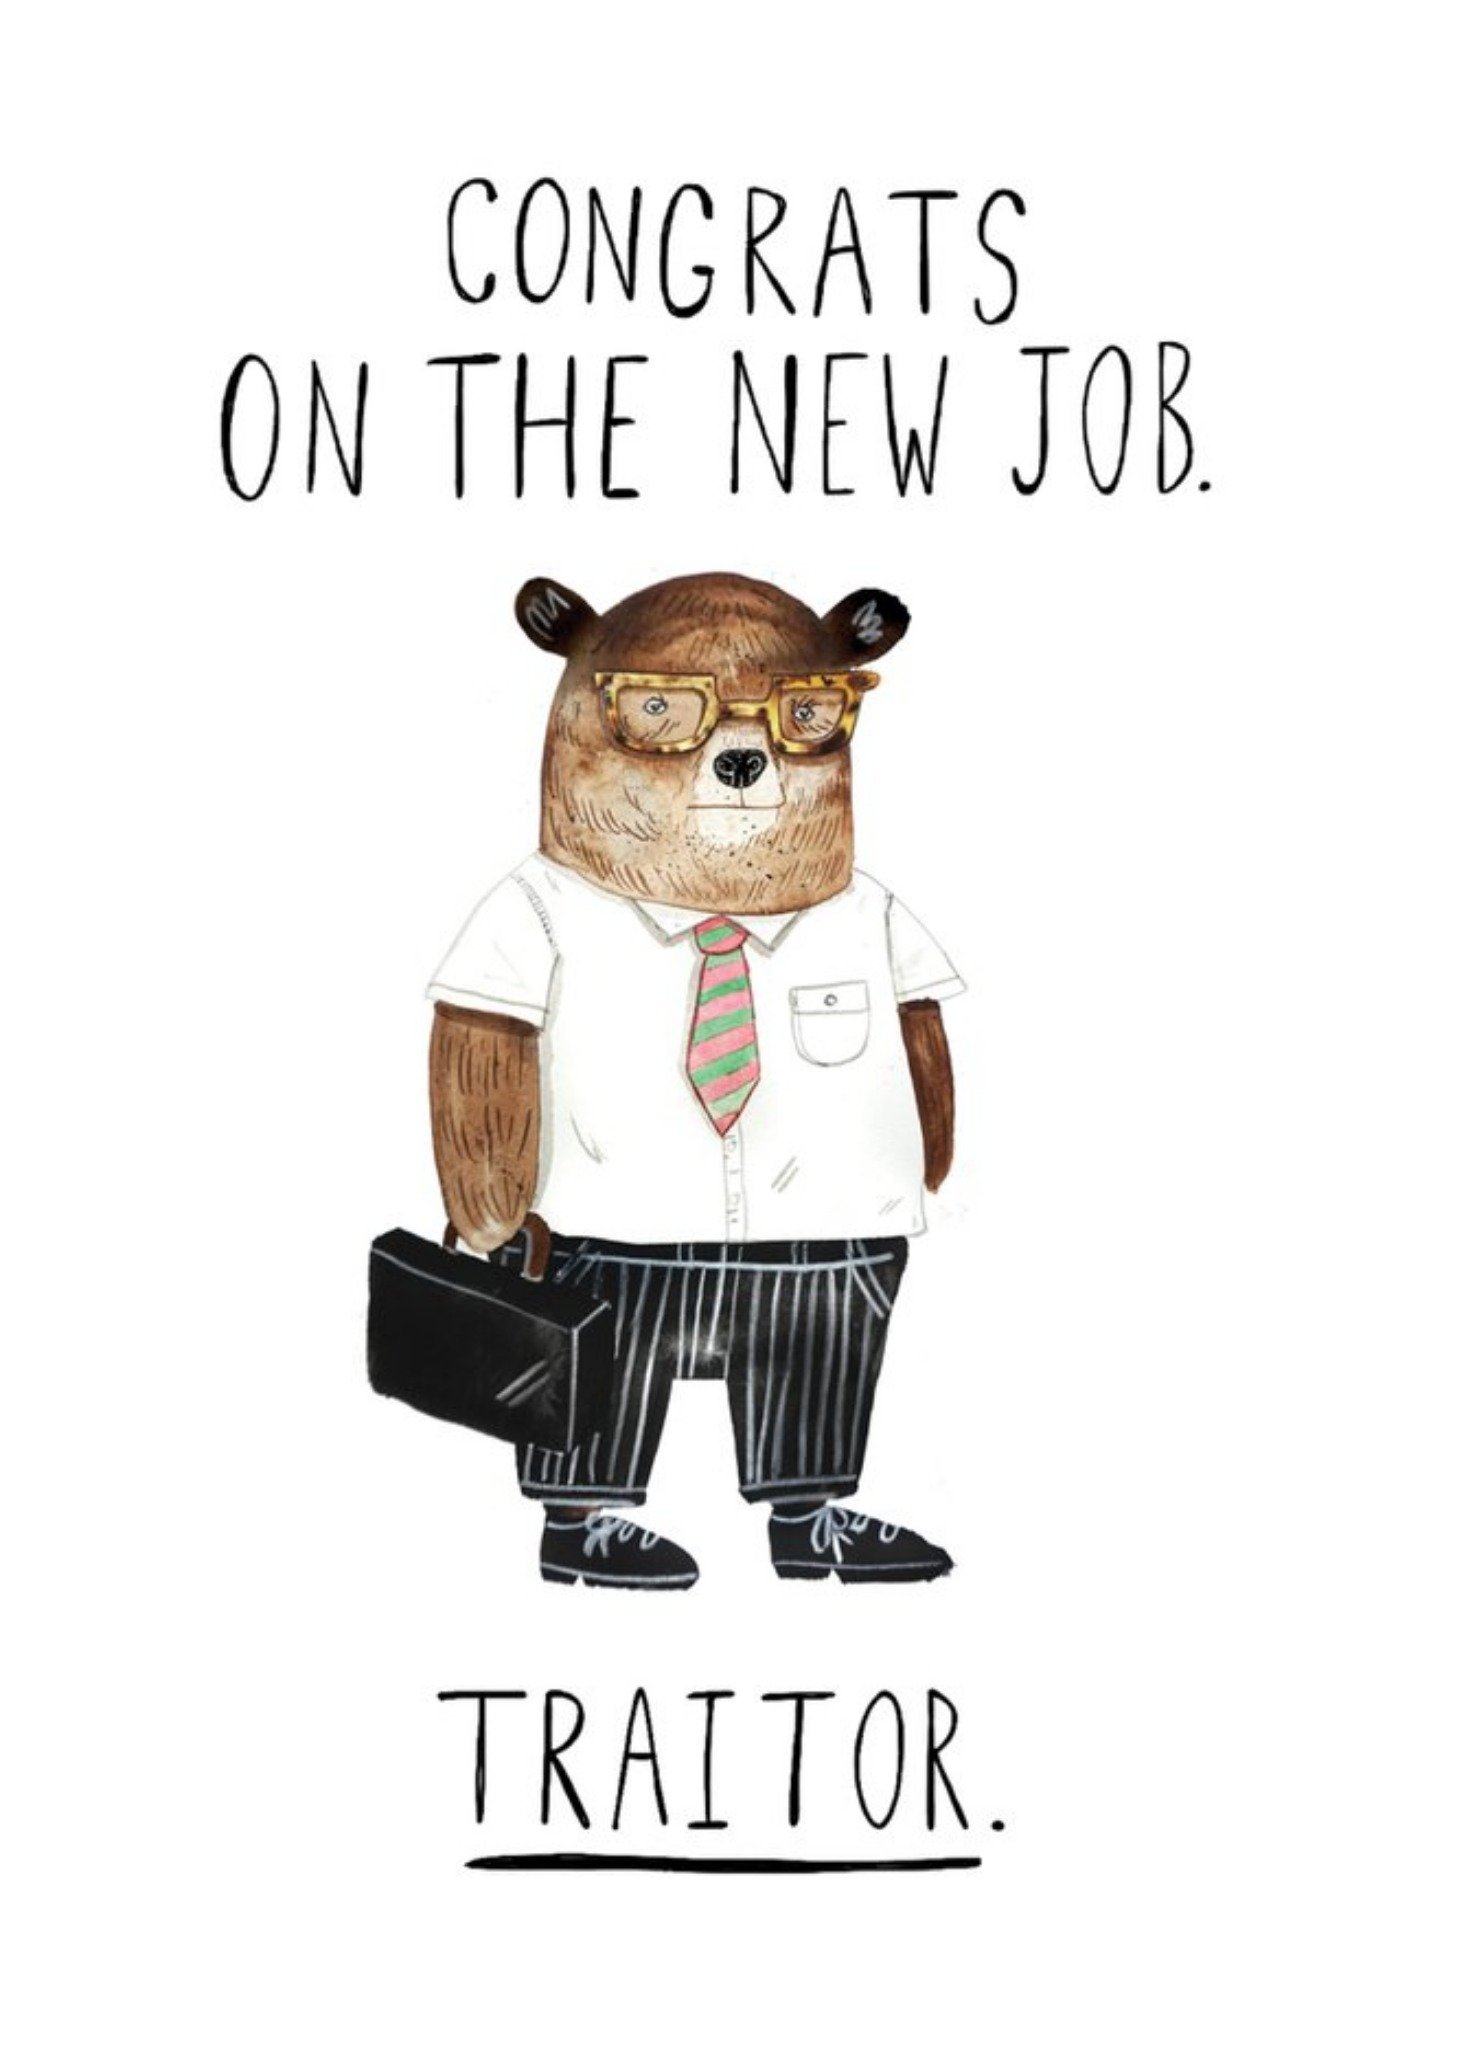 Jolly Awesome Congrats On The New Job Traitor Leaving Card, Large